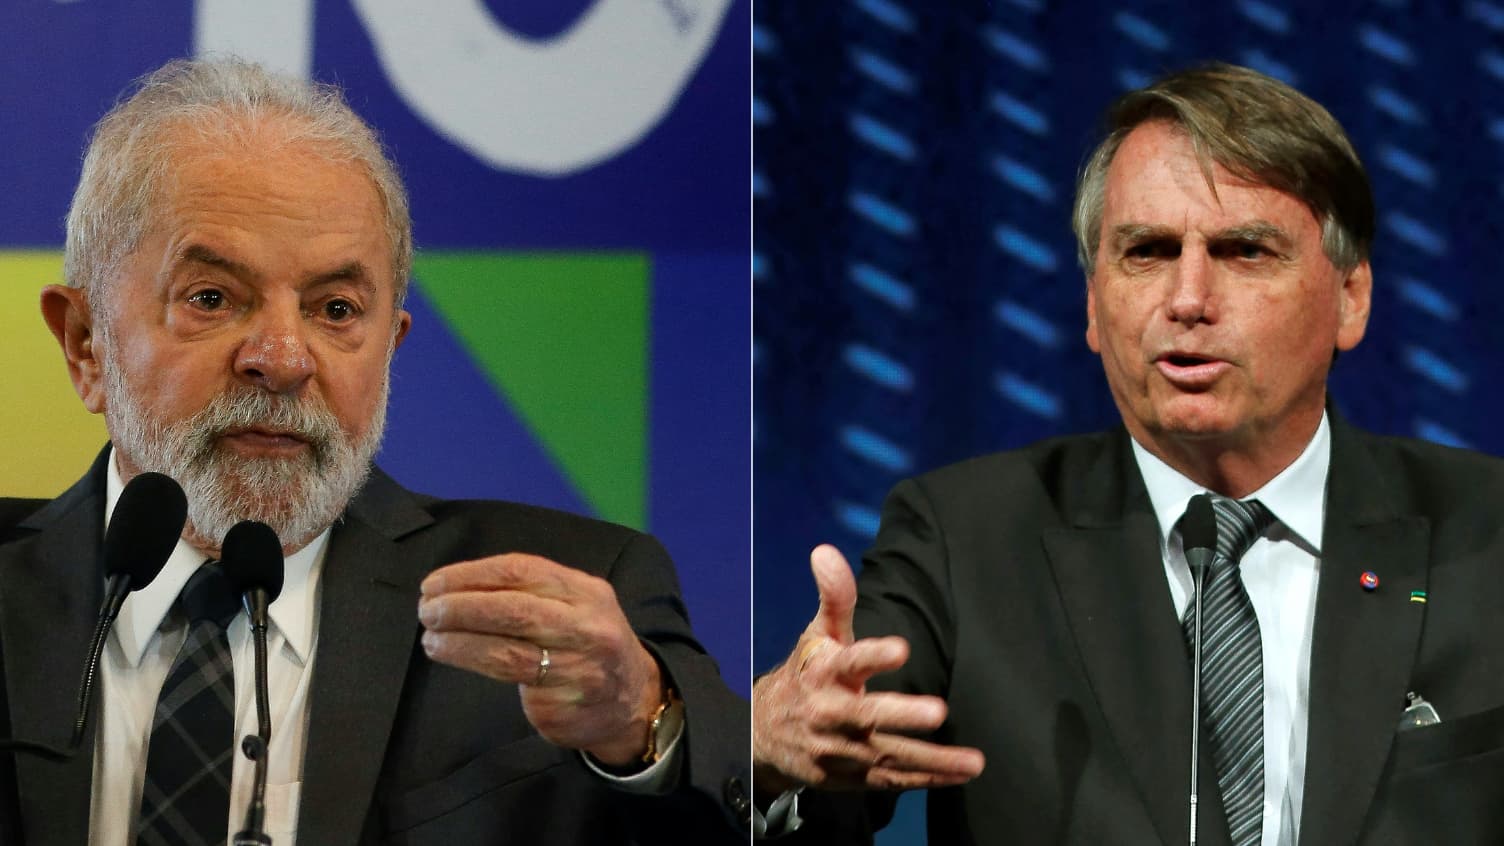 The election is closing, and the Lula-Bolsonaro fight will soon be decided